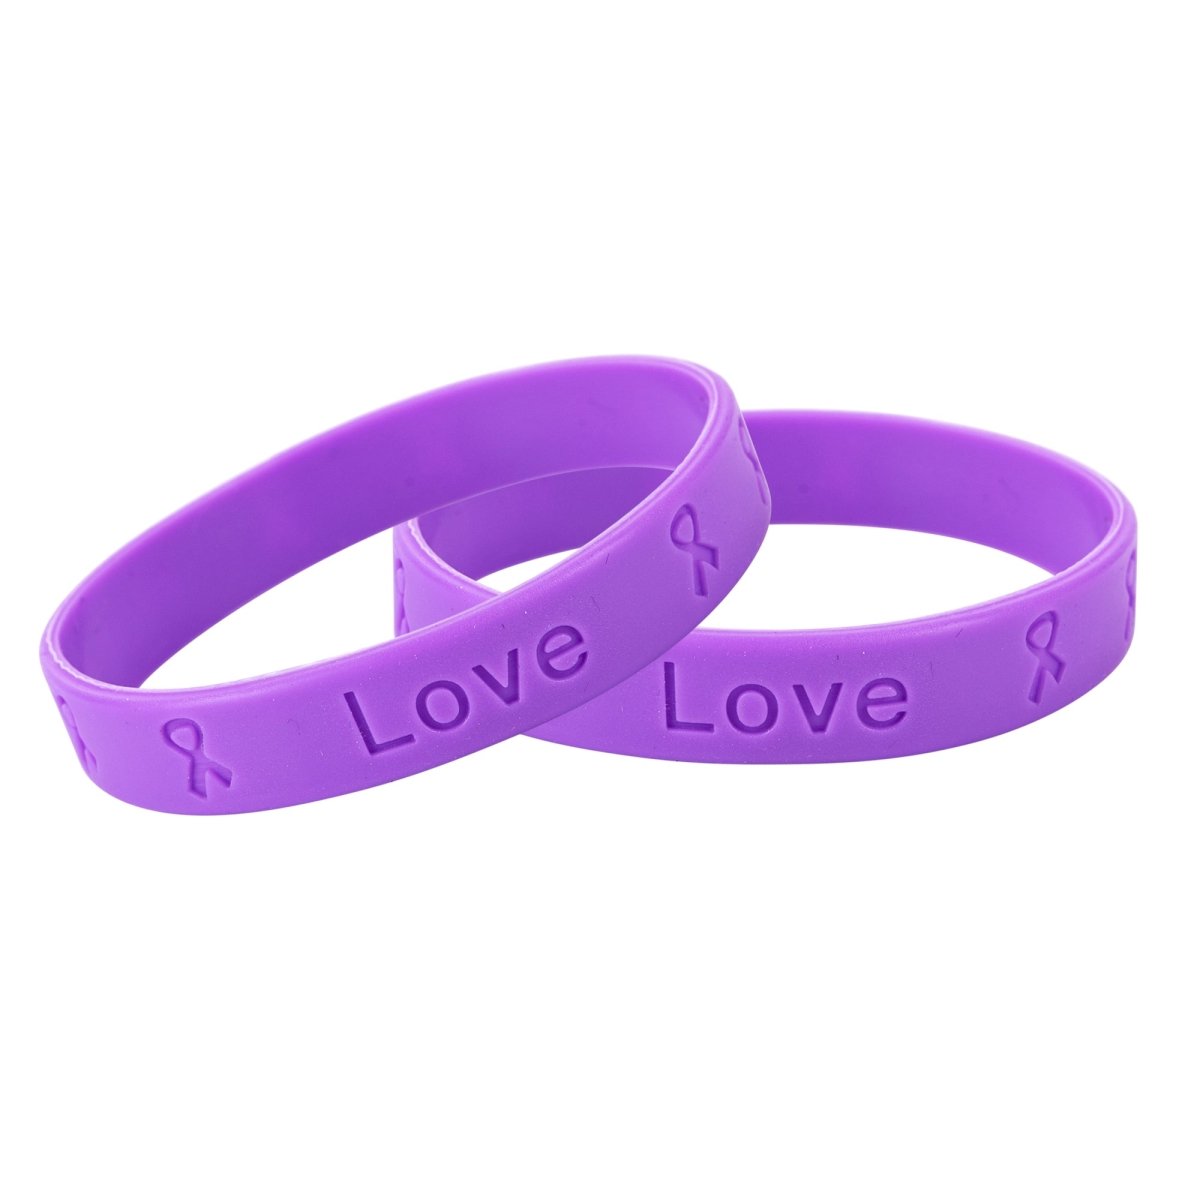 Adult Testicular Cancer Awareness Silicone Bracelet Wristbands - Fundraising For A Cause